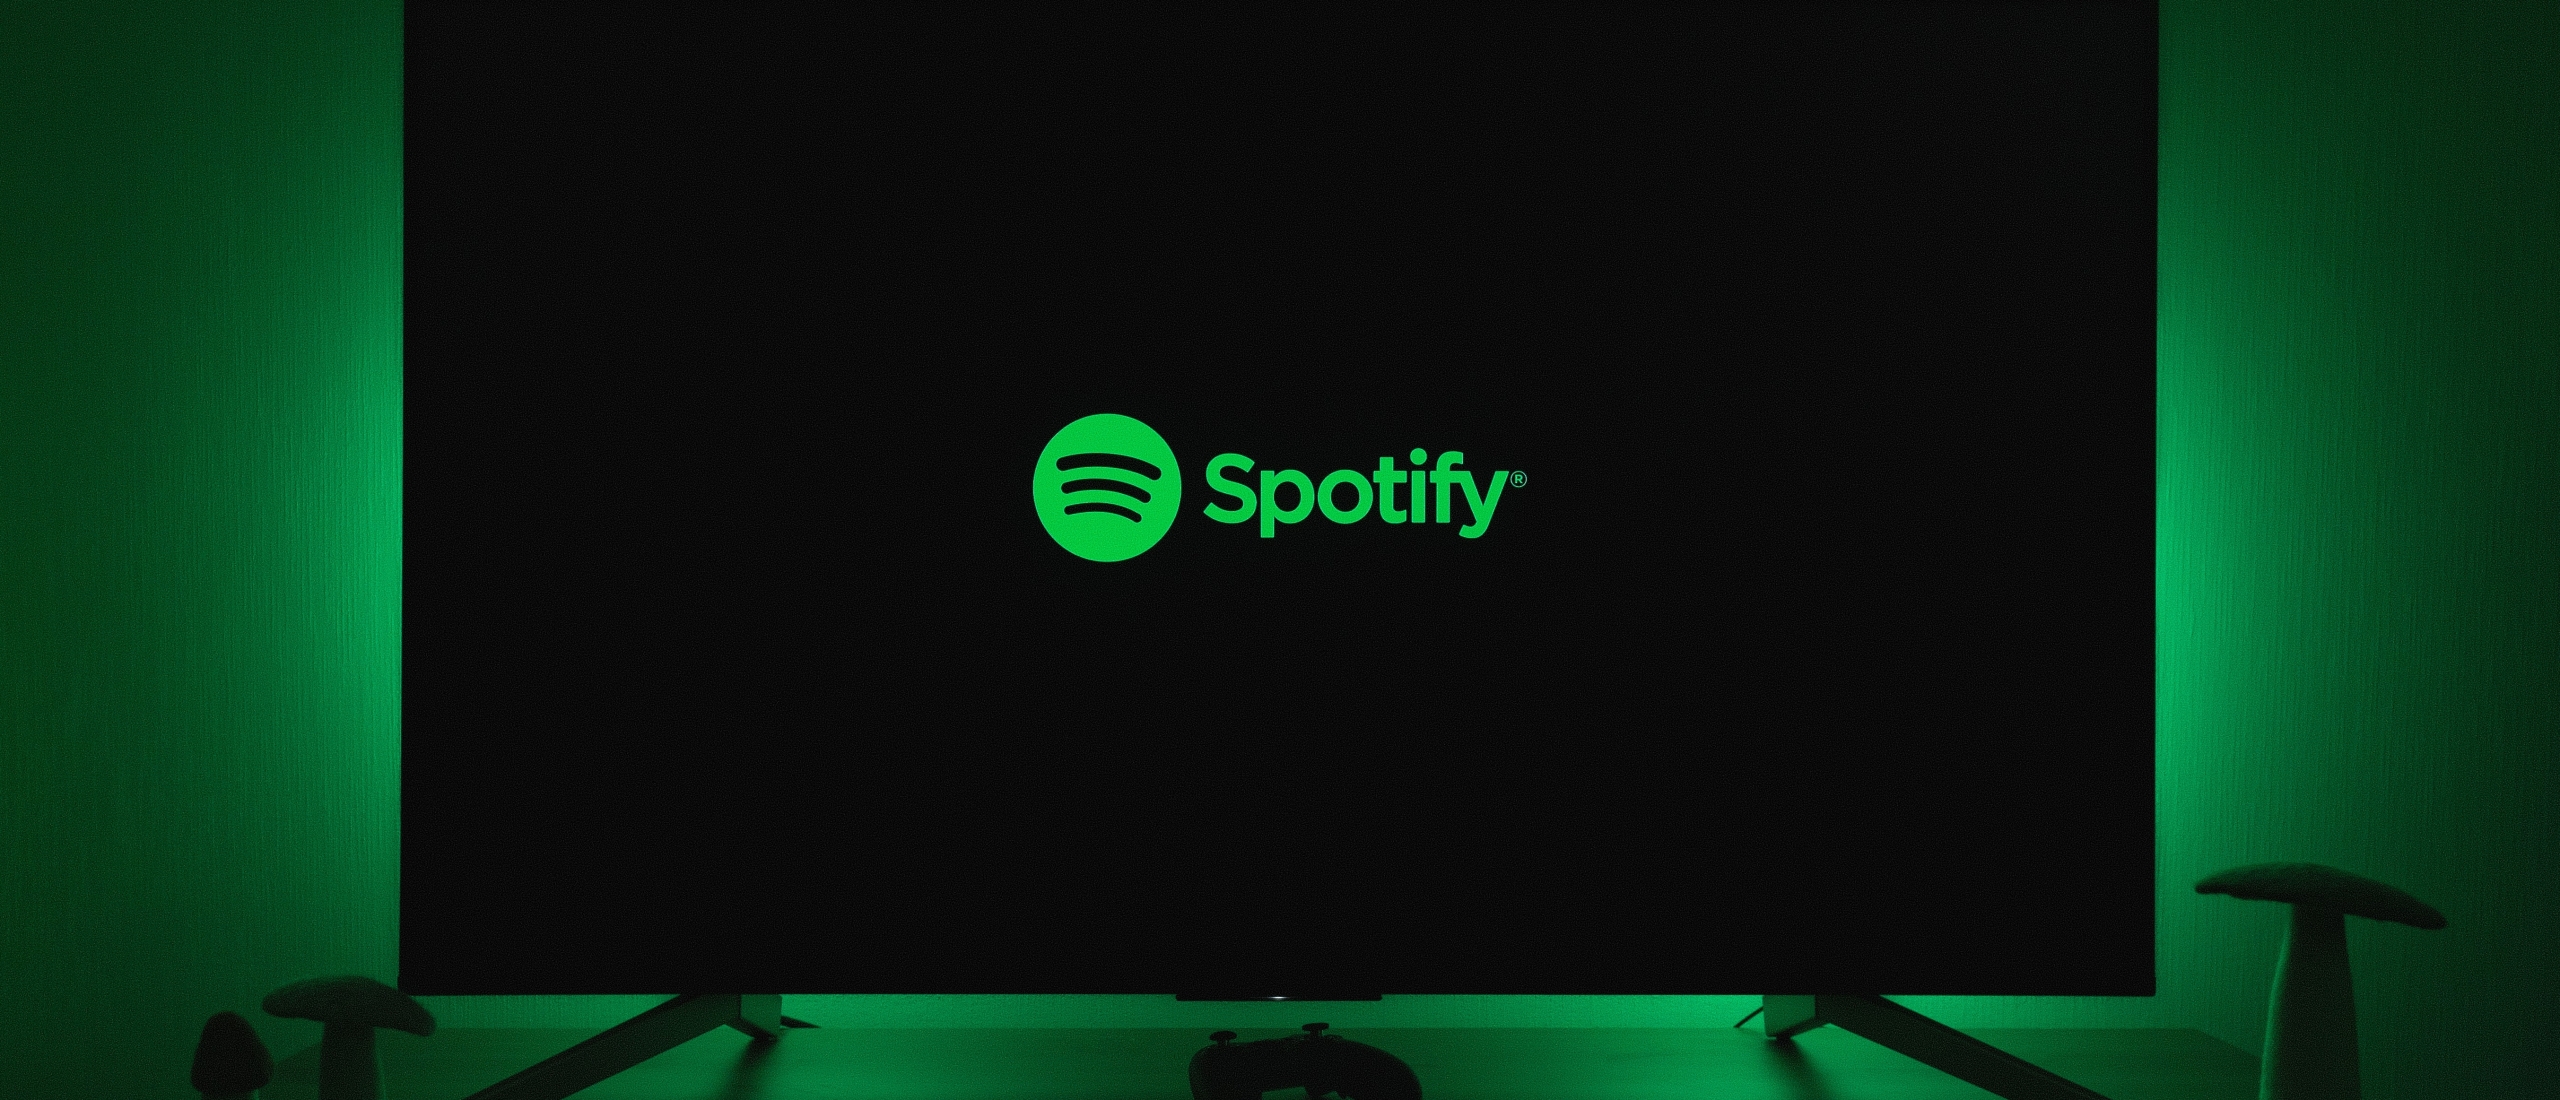 15 Tips On How To Get More Streams on Spotify